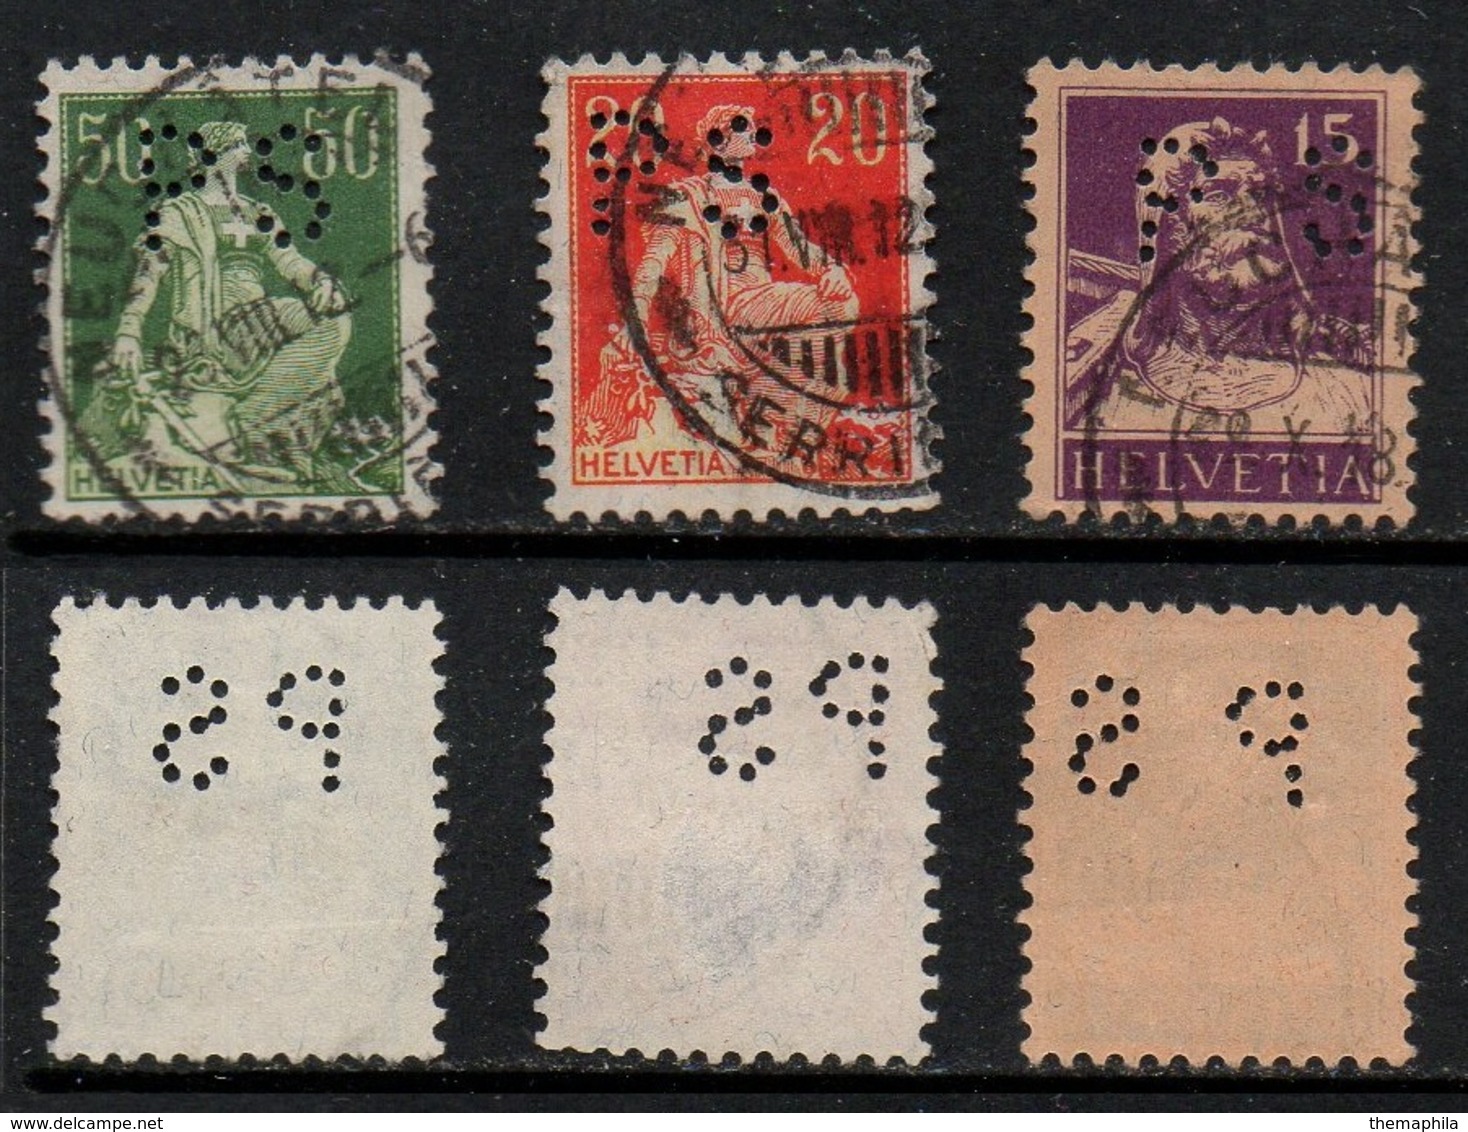 CHOCOLAT SUCHARD / 3 TIMBRES DE SUISSE PERFORES "PS" - PERFIN (ref T1986) - Alimentation